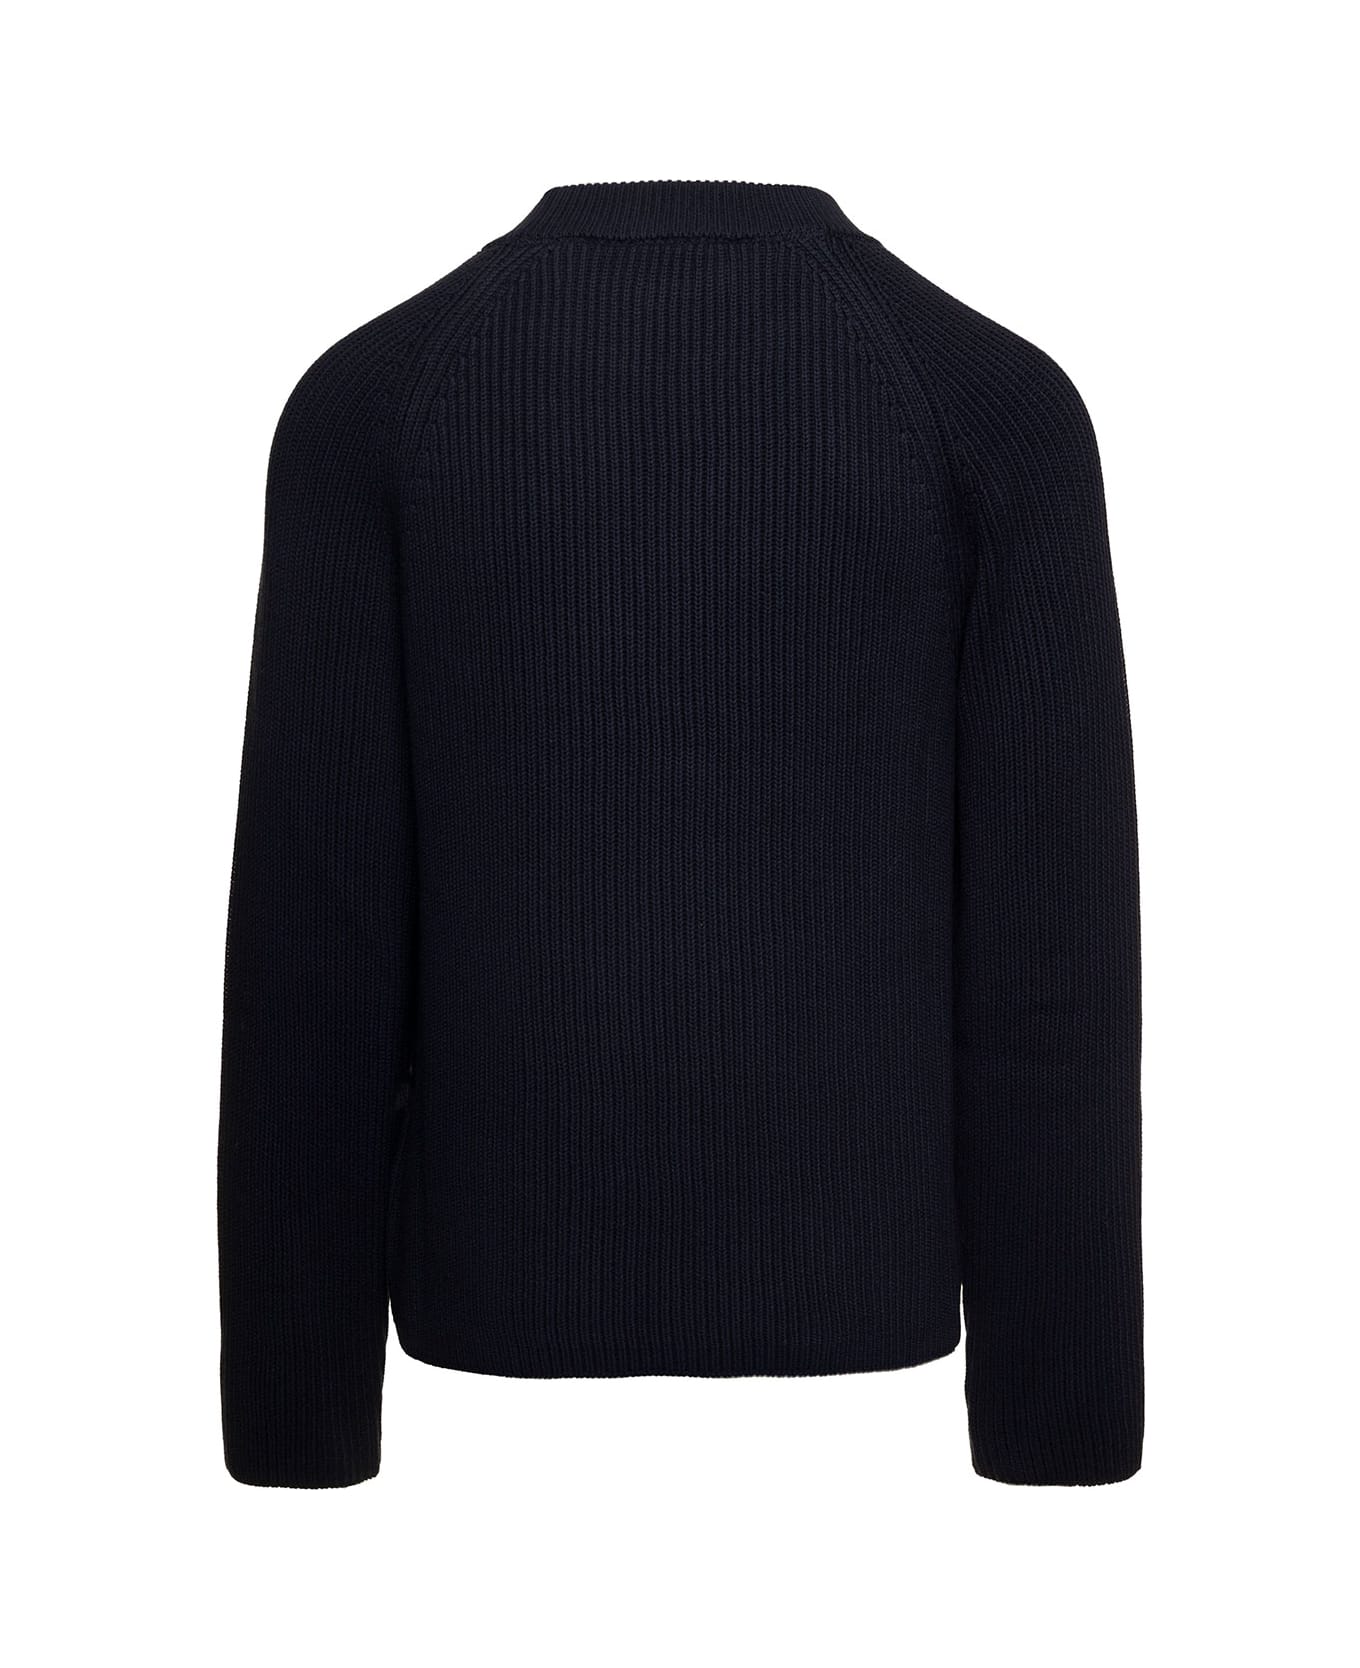 Ami Alexandre Mattiussi Dark Blue Crewneck Ribbed Sweater With Tonal Logo Patch In Wool And Cotton Man - Blu